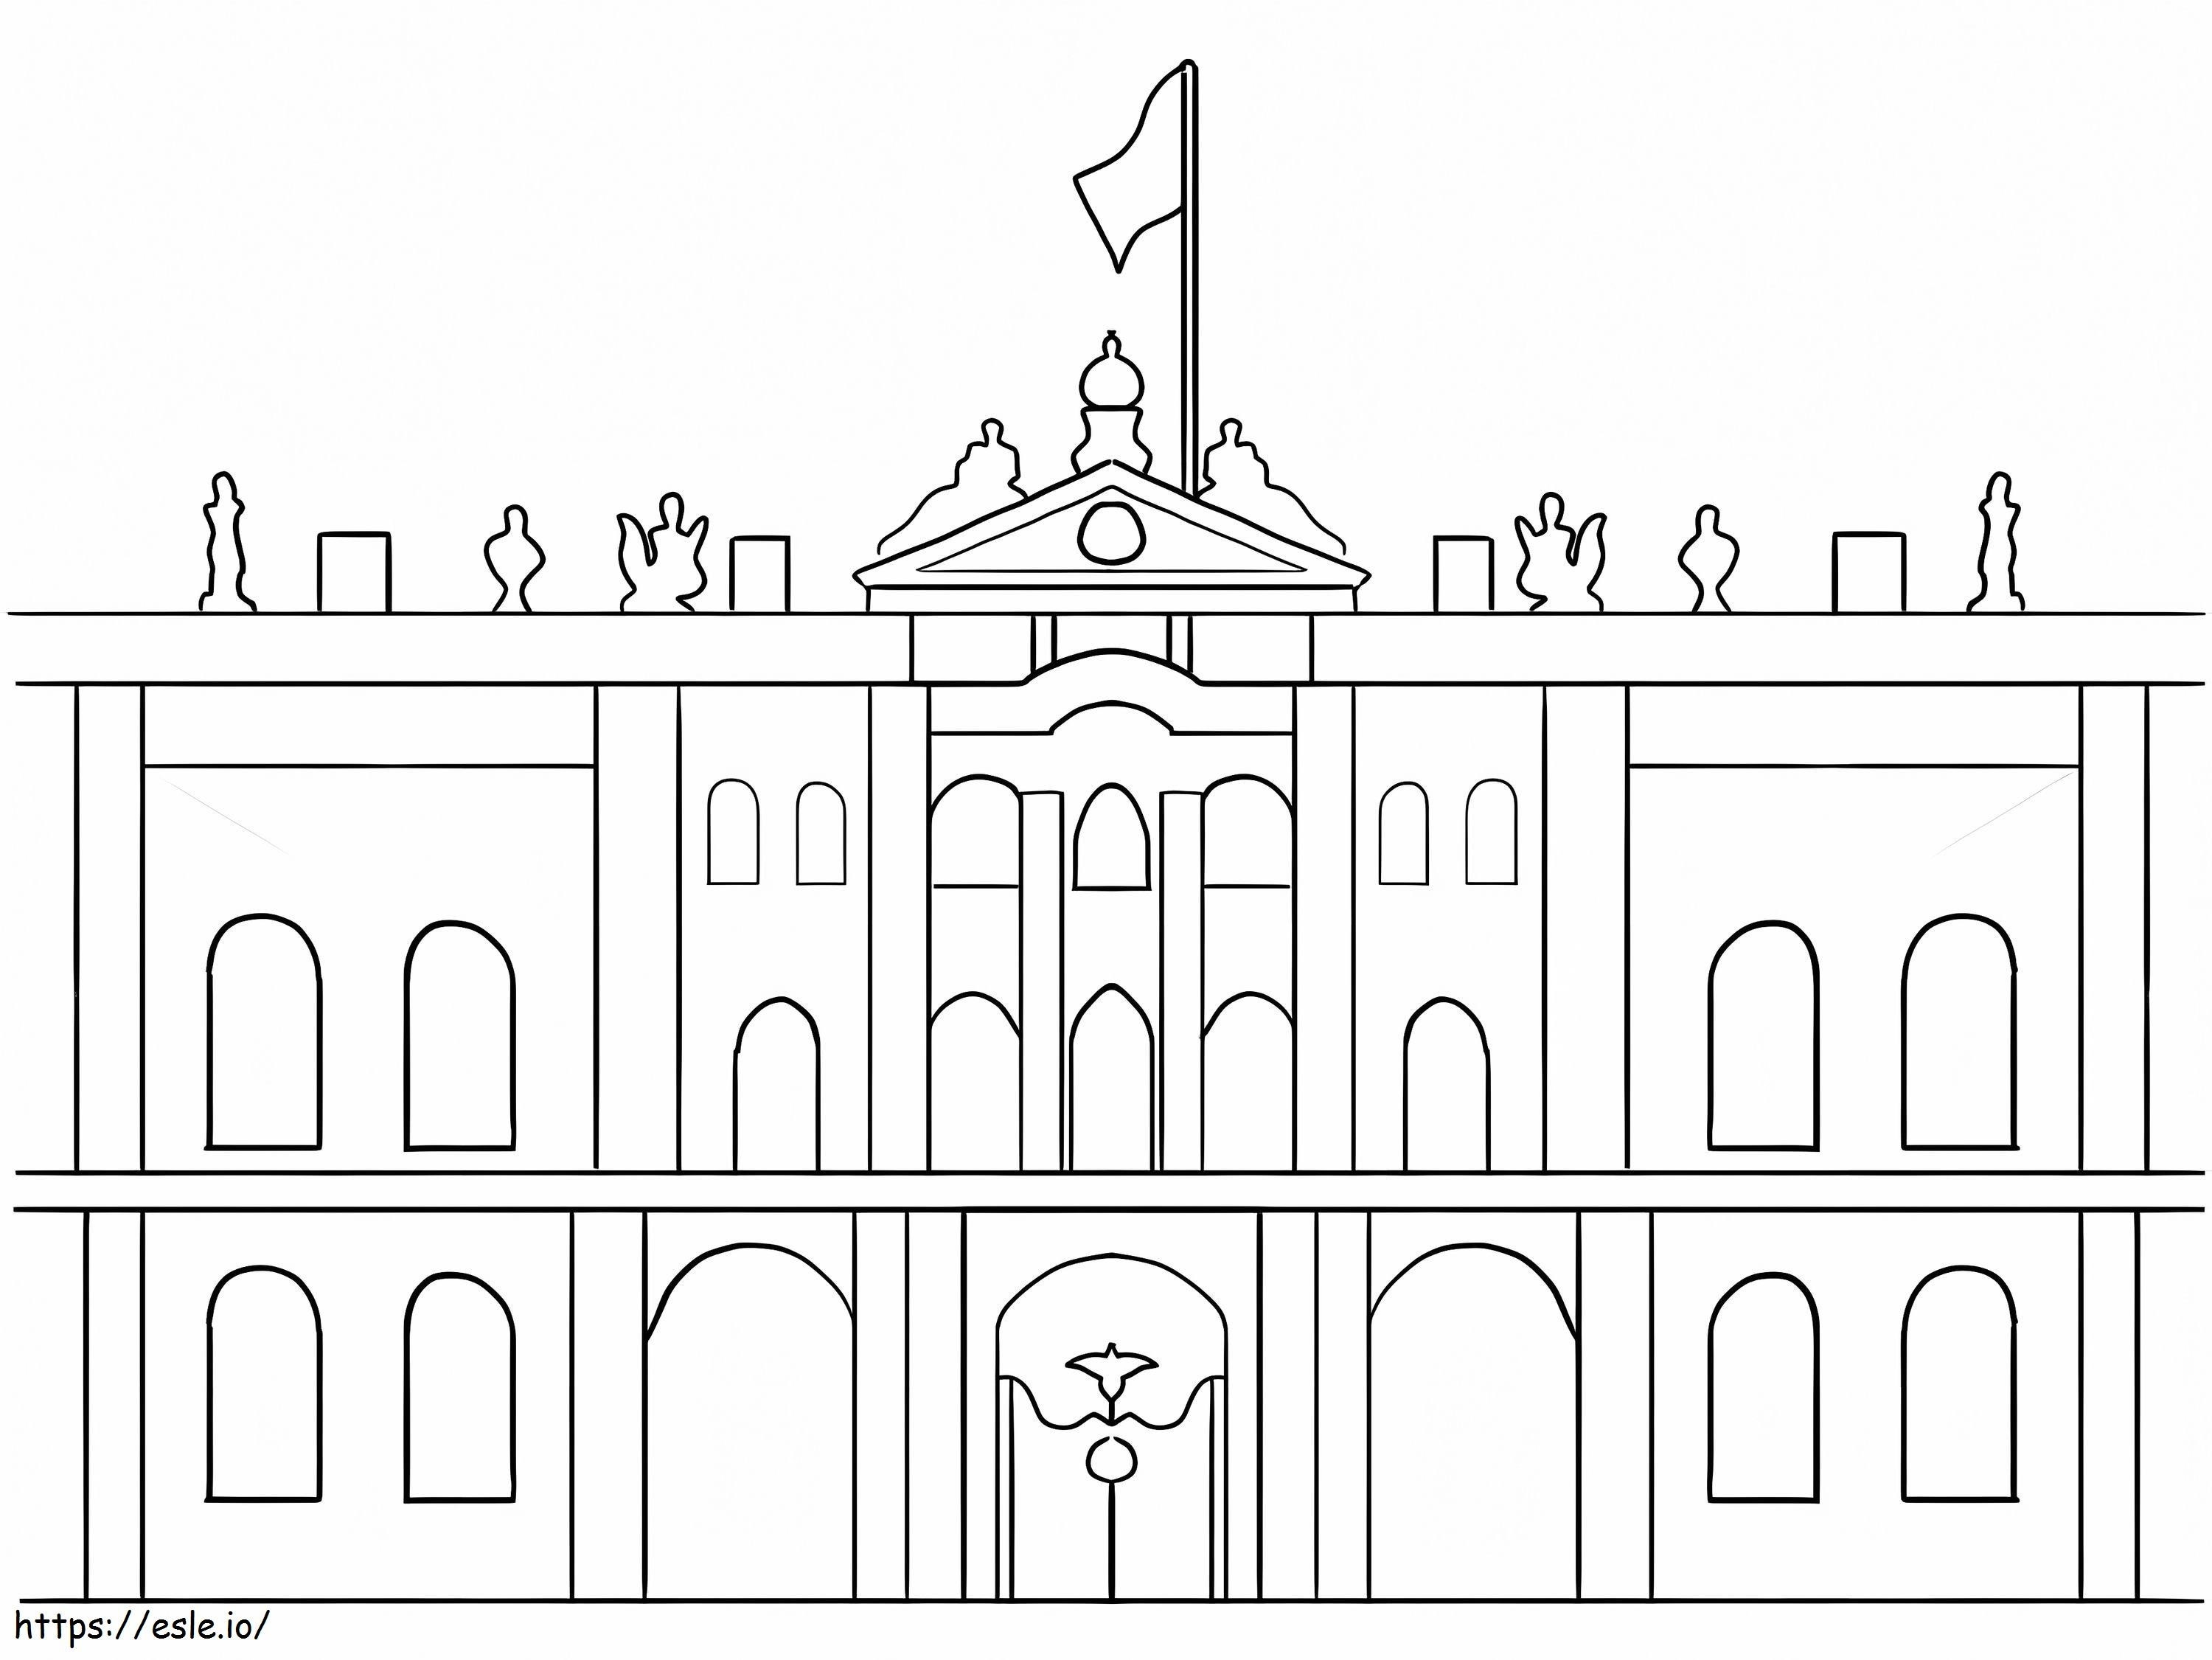 Hermitage Museum coloring page